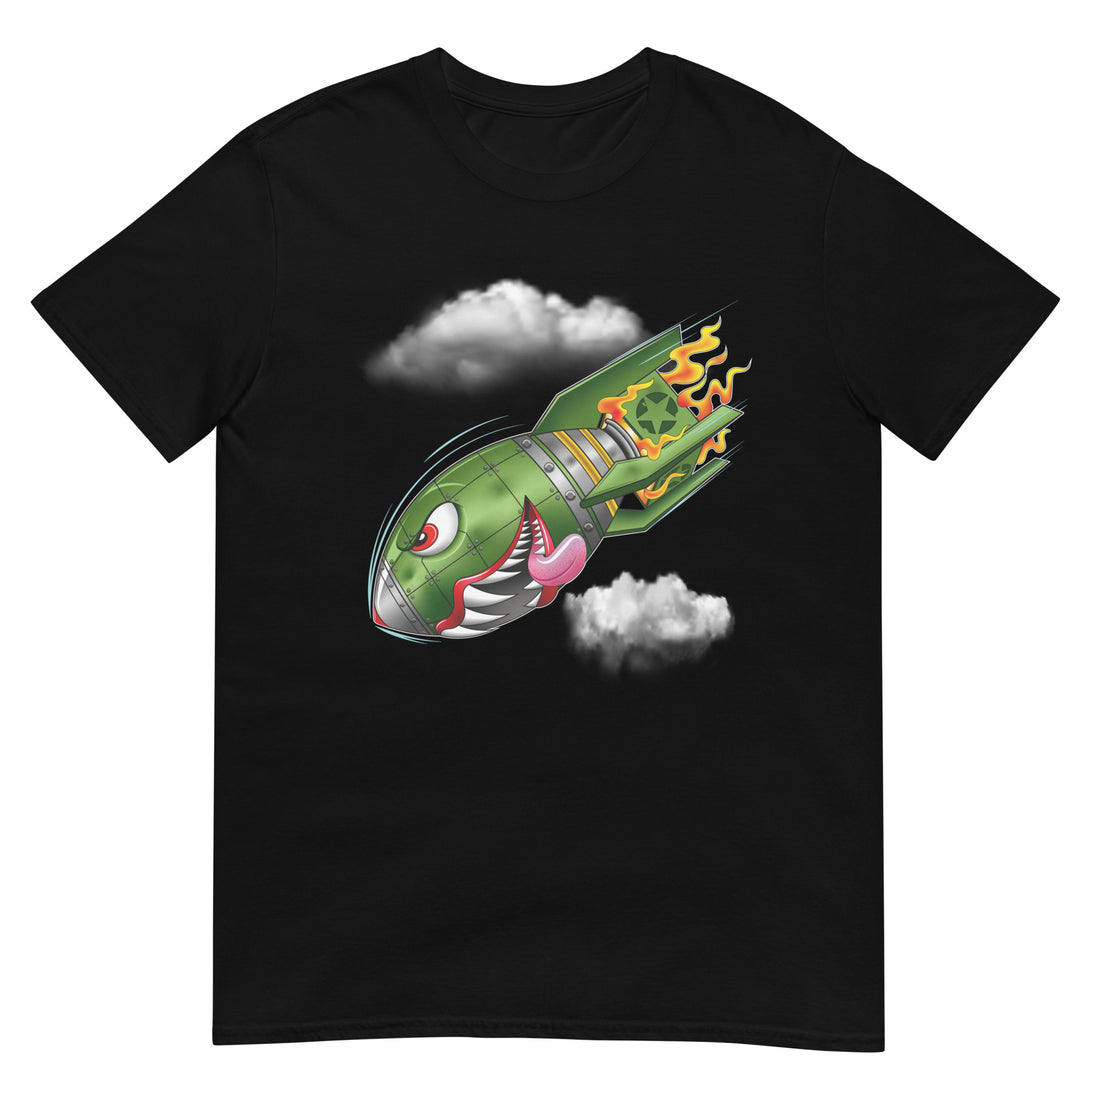 A black t-shirt with a military green neo-traditional bomb tattoo design. The bomb is falling with a look of determination in its eyes, an evil toothy grin, and its tongue hanging out of its mouth. Flames are coming from the back of the bomb, and some clouds are in the background.